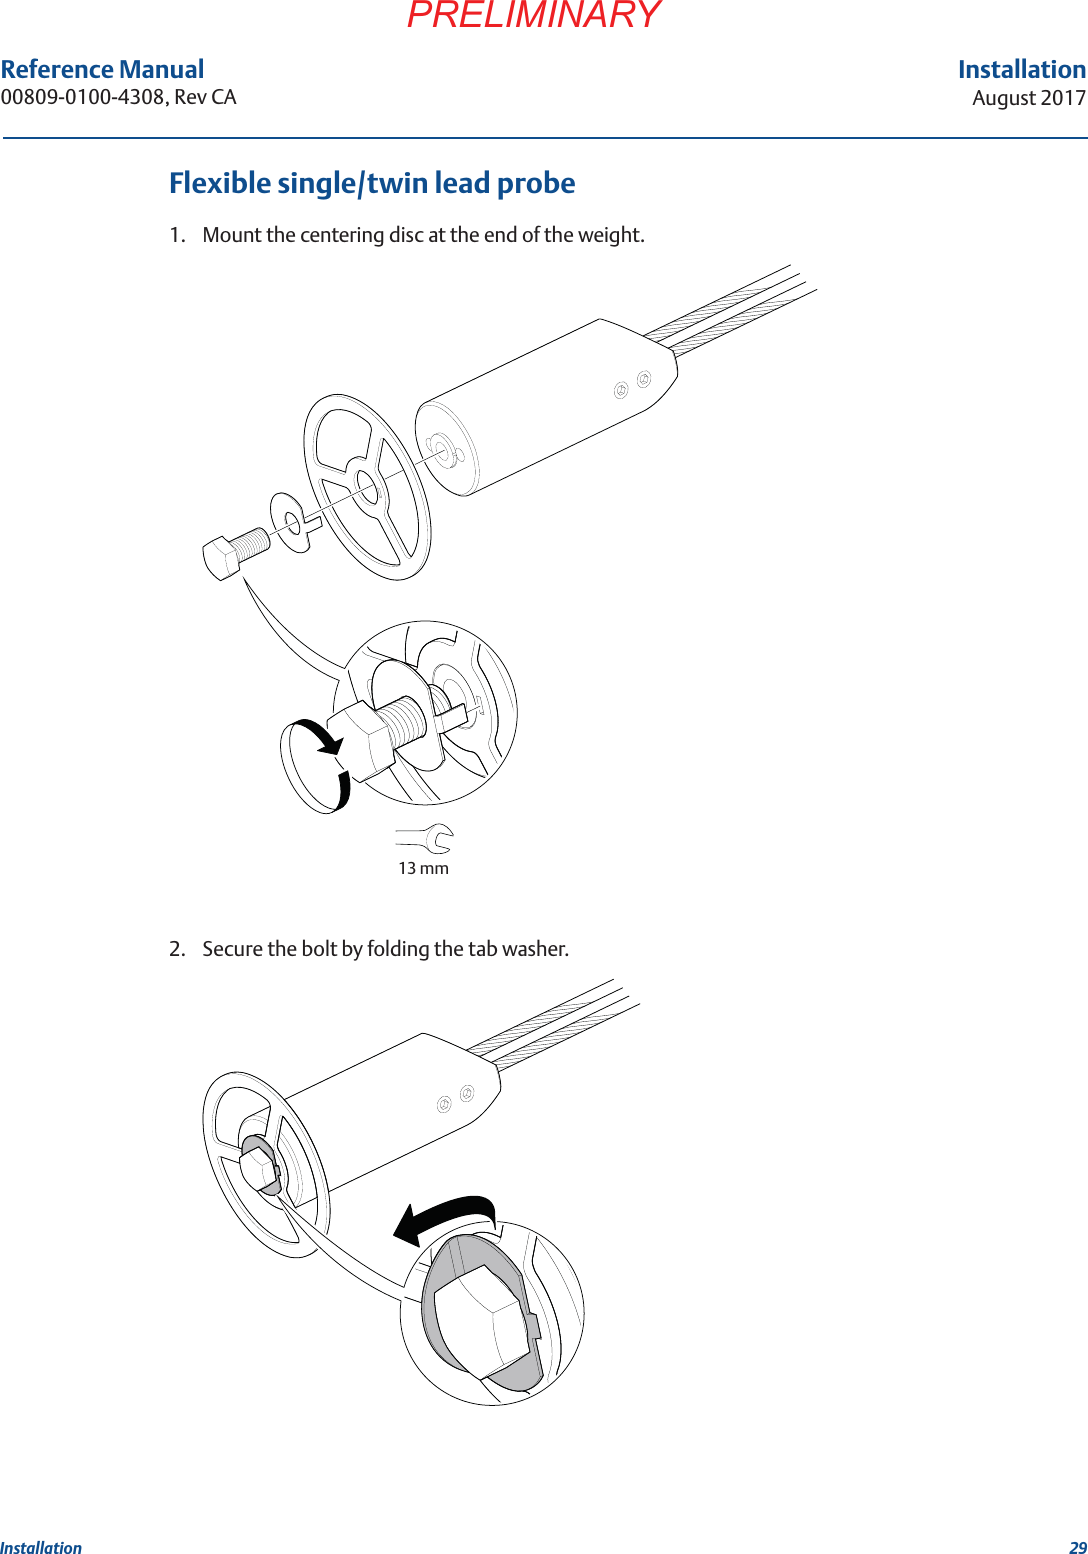 29InstallationAugust 2017InstallationPRELIMINARYReference Manual 00809-0100-4308, Rev CAFlexible single/twin lead probe1. Mount the centering disc at the end of the weight.2. Secure the bolt by folding the tab washer.13 mm